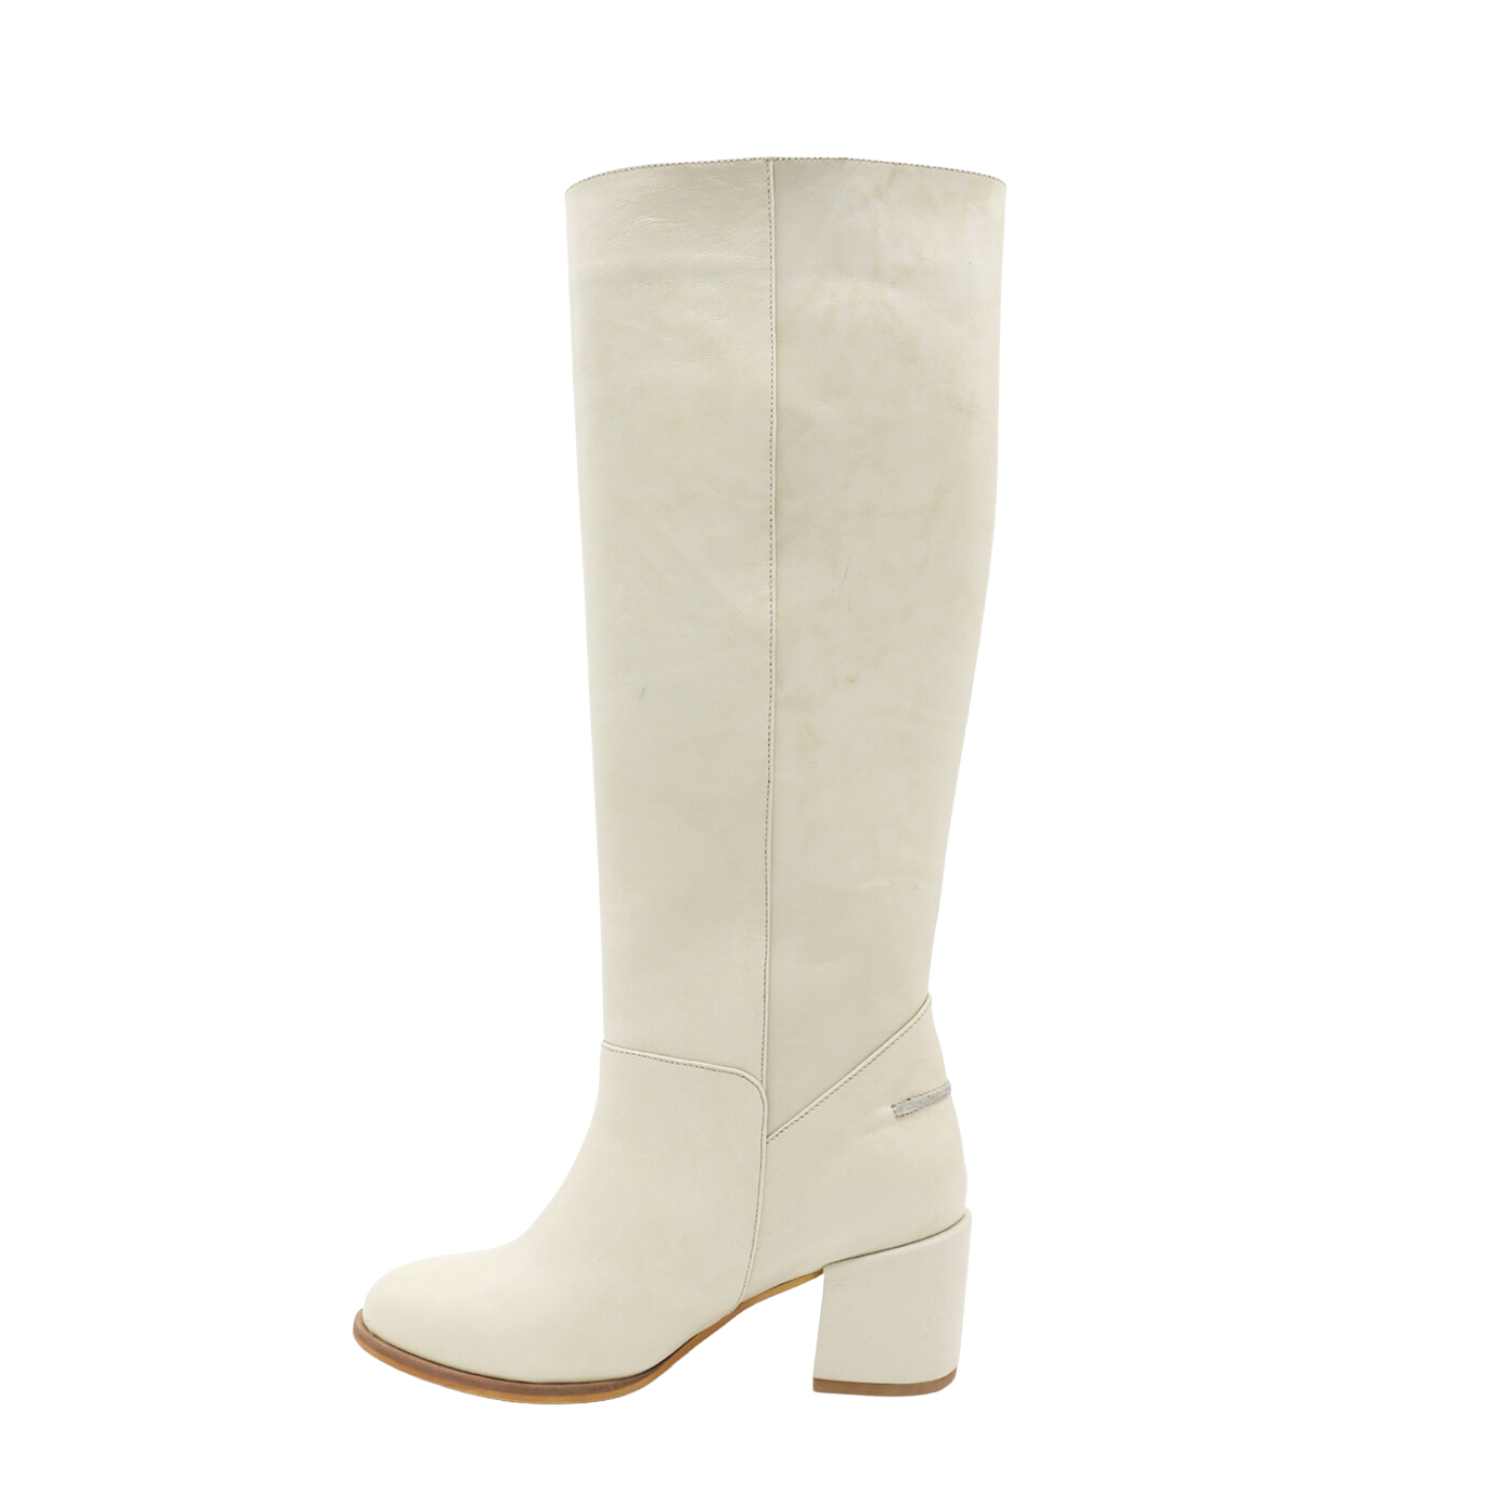 Women’s Neutrals Cléo Knee High Boots In Ivory Leather 6 Uk Stivali New York